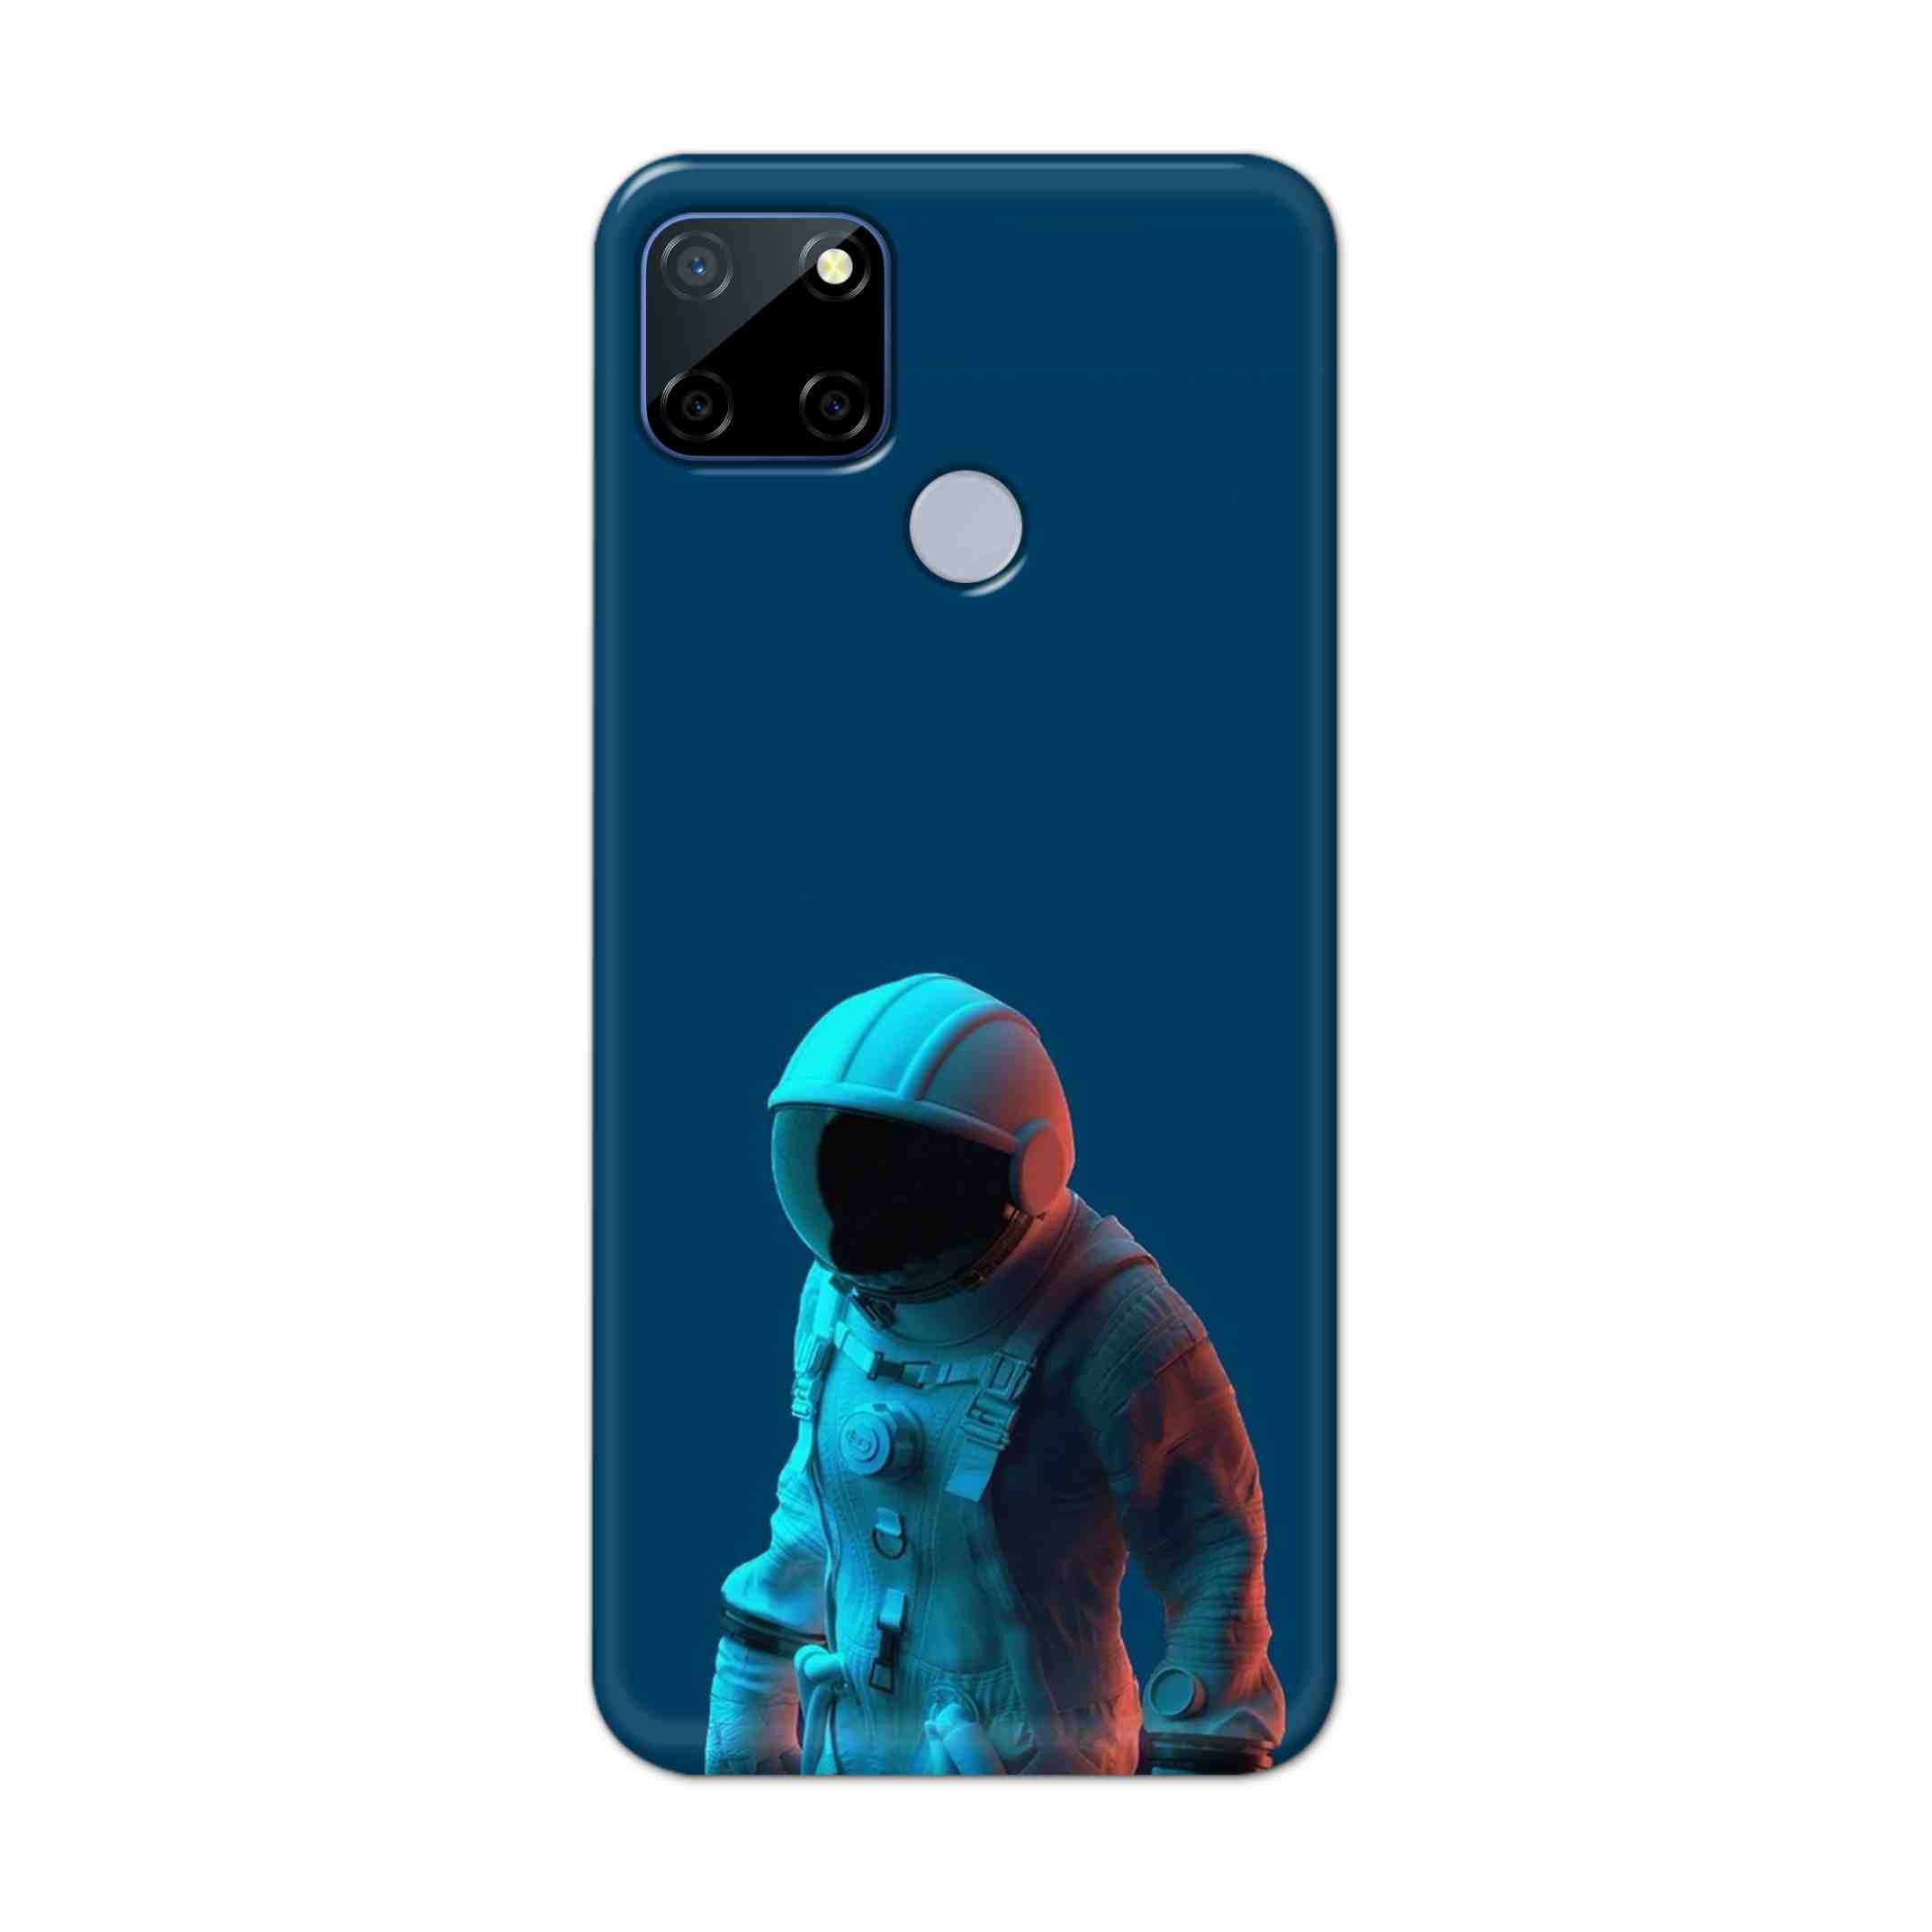 Buy Blue Astronaut Hard Back Mobile Phone Case Cover For Realme C12 Online